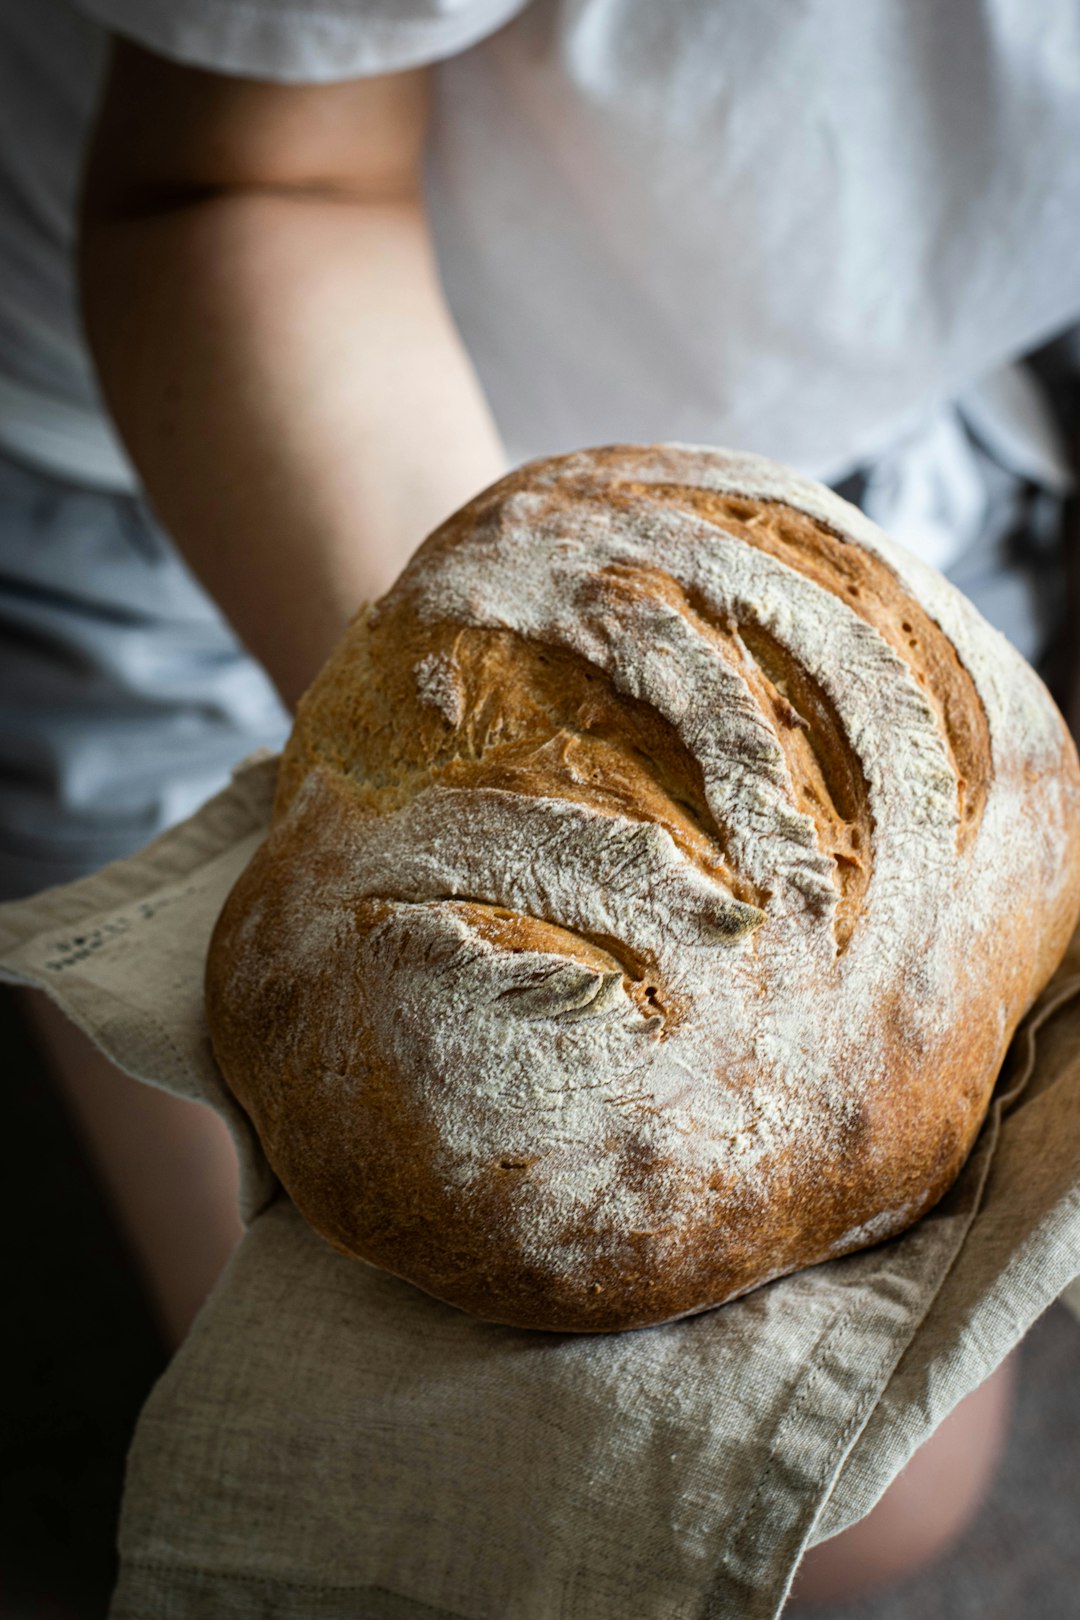 Mastering the art of crafting naturally delicious bread